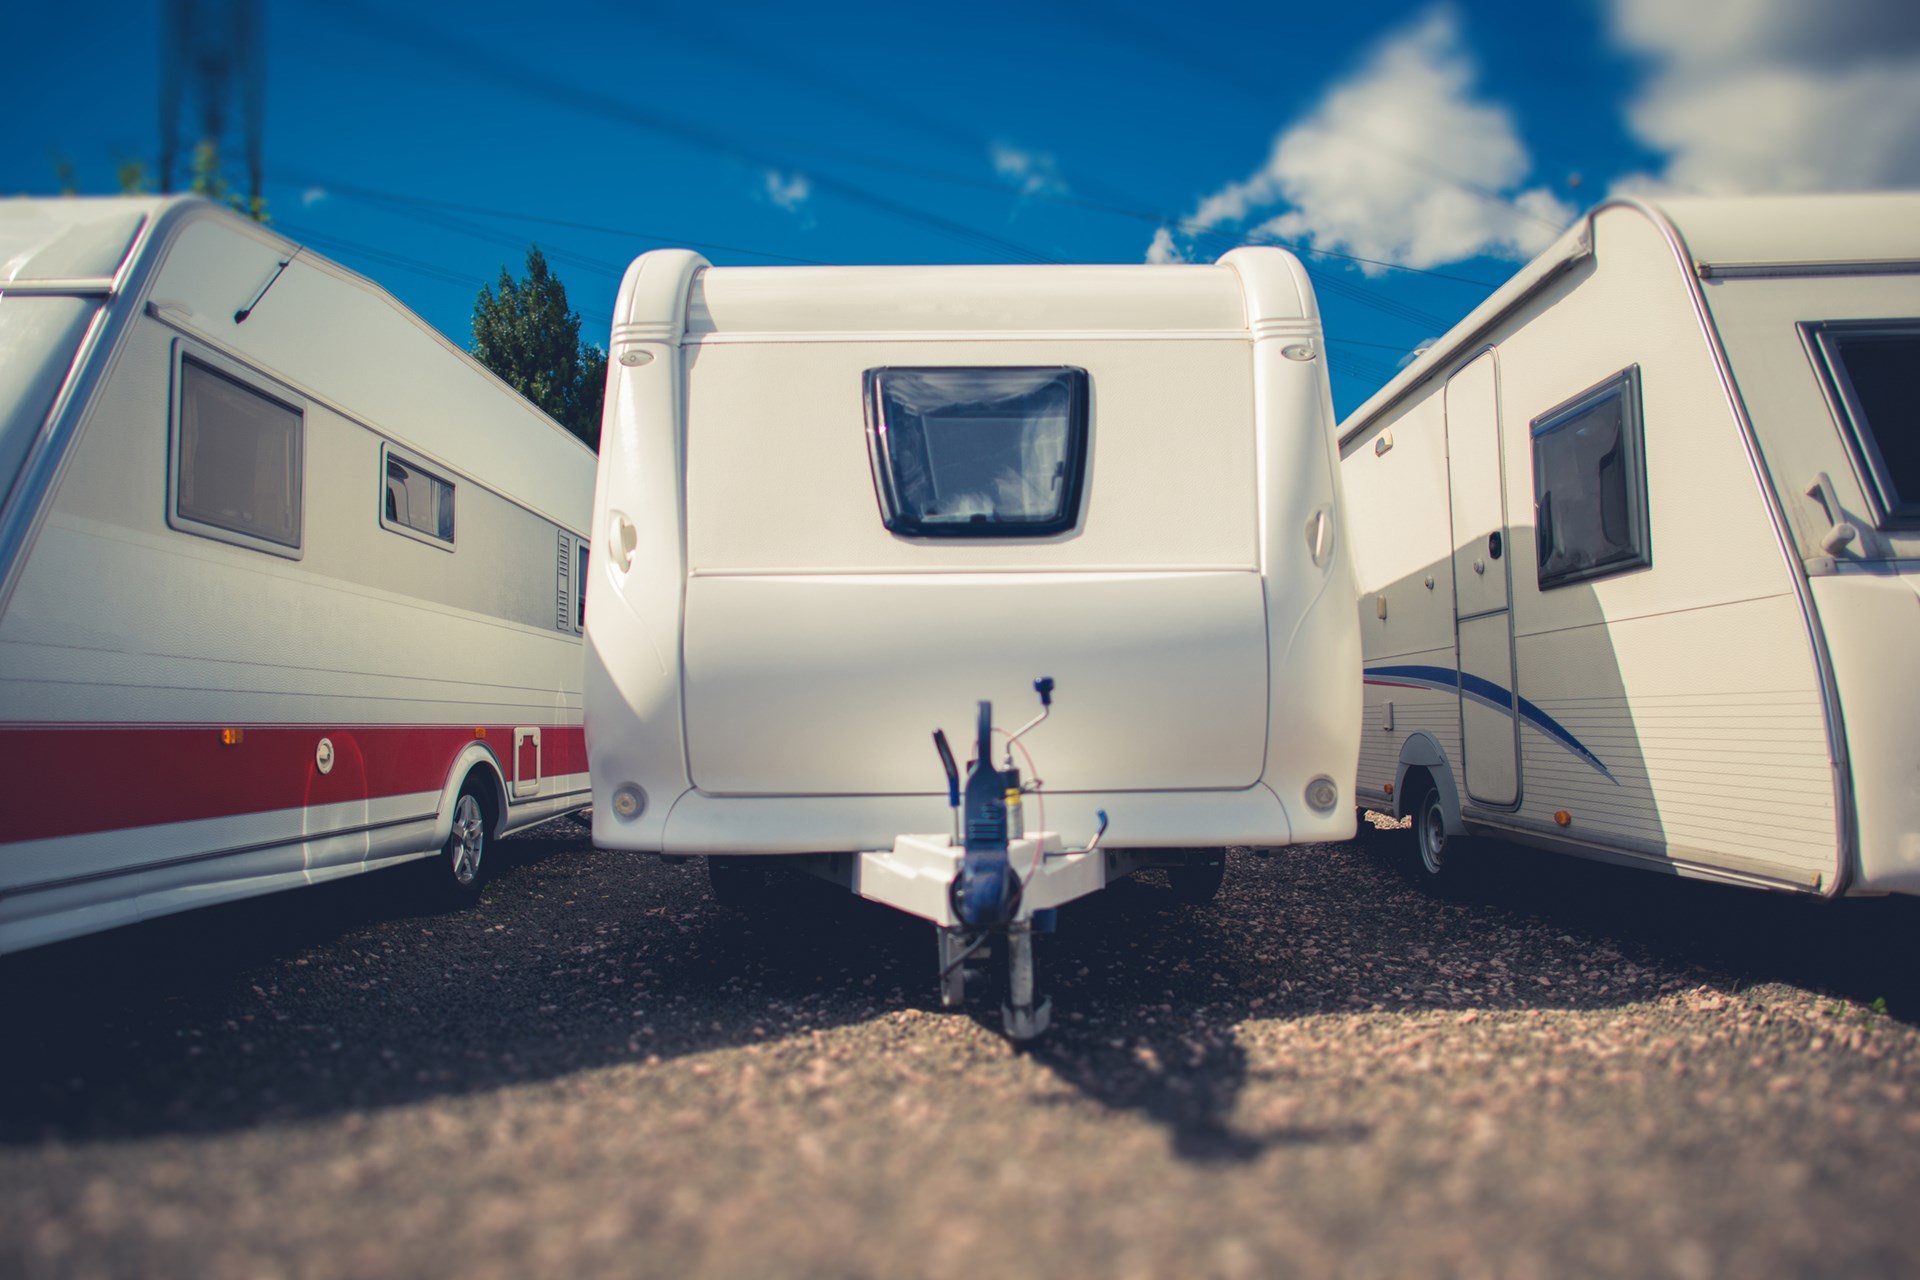 Top 10 Tips for Keeping your Camper Organized - RV World MN Blog